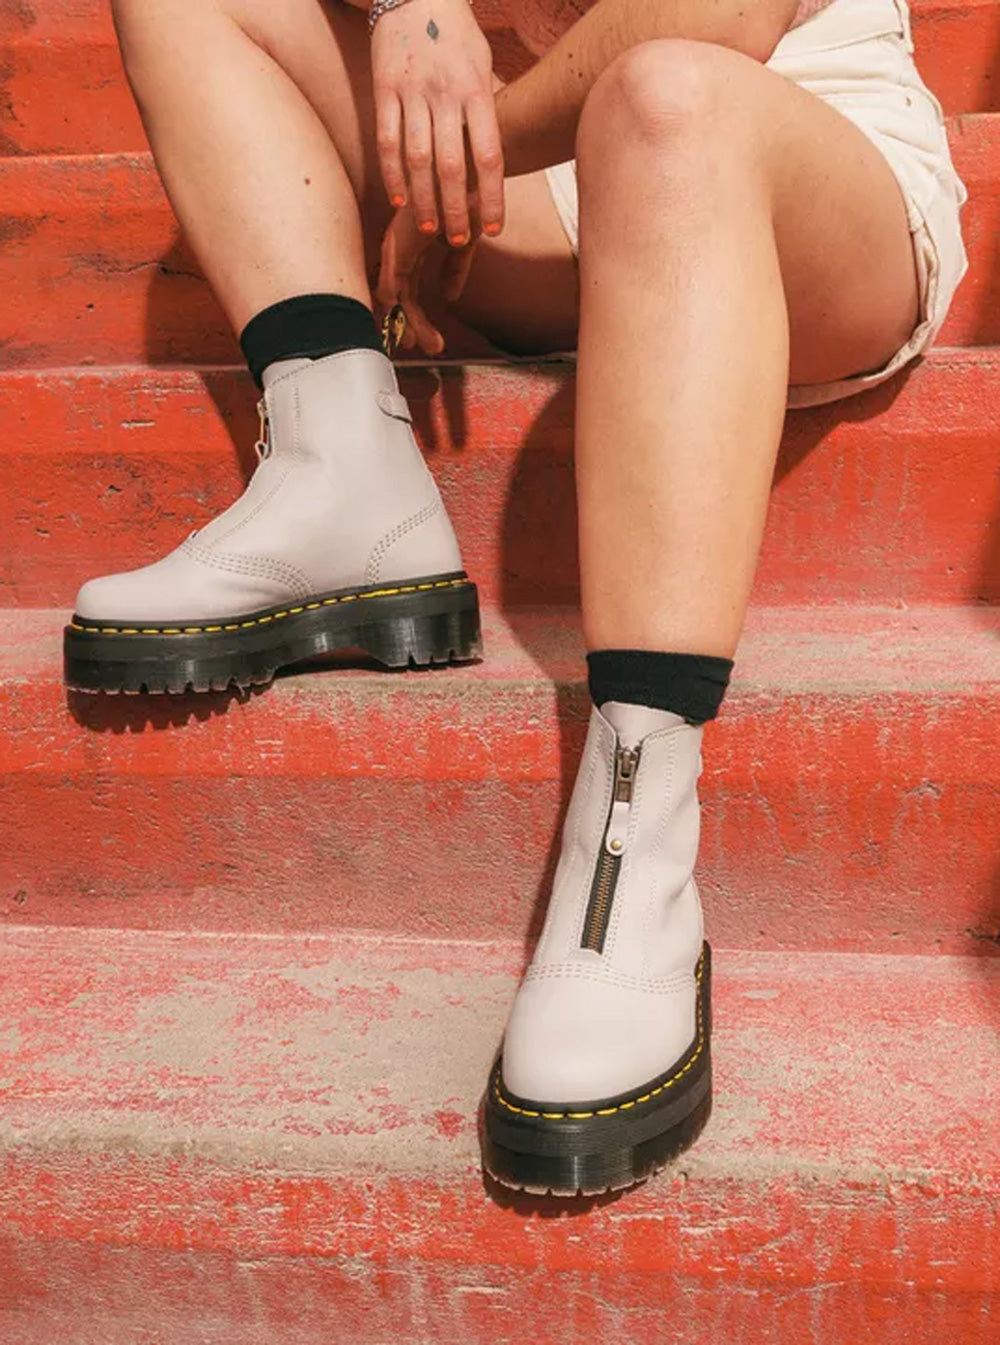 Dr. Martens Jetta Zipped Leather Platform Boots in White